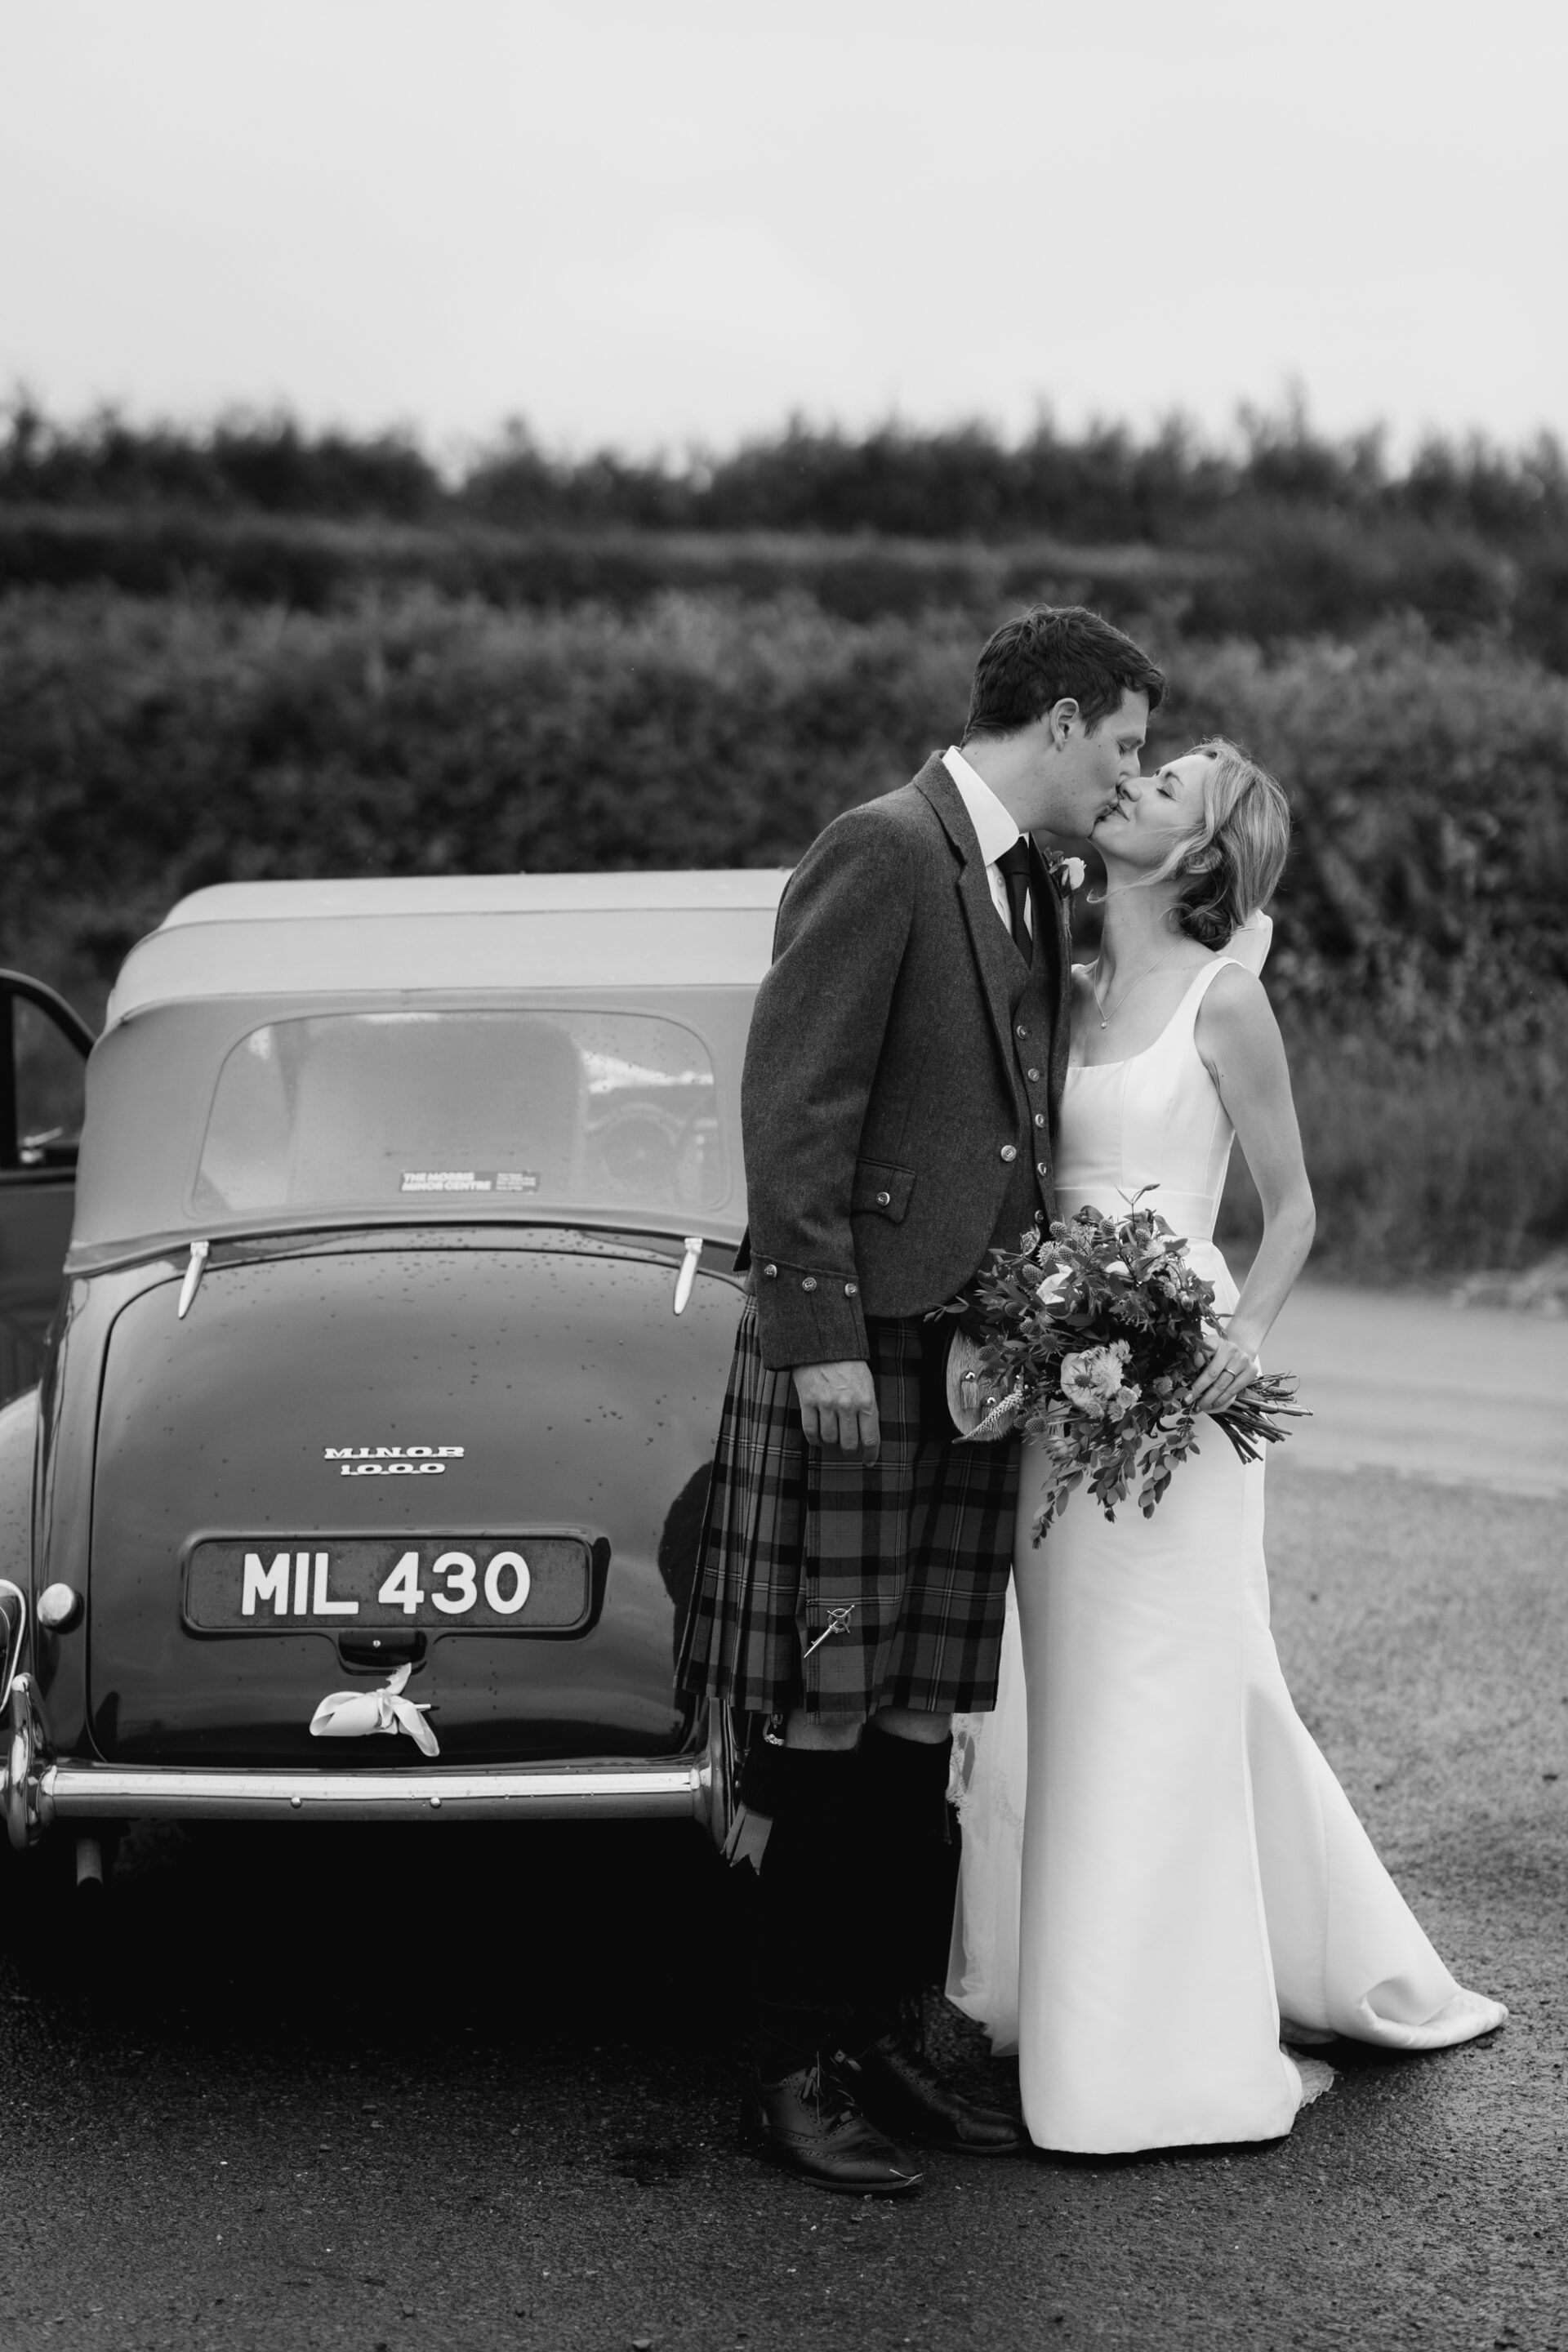 The bride and groom share a kiss next to their classic wedding car